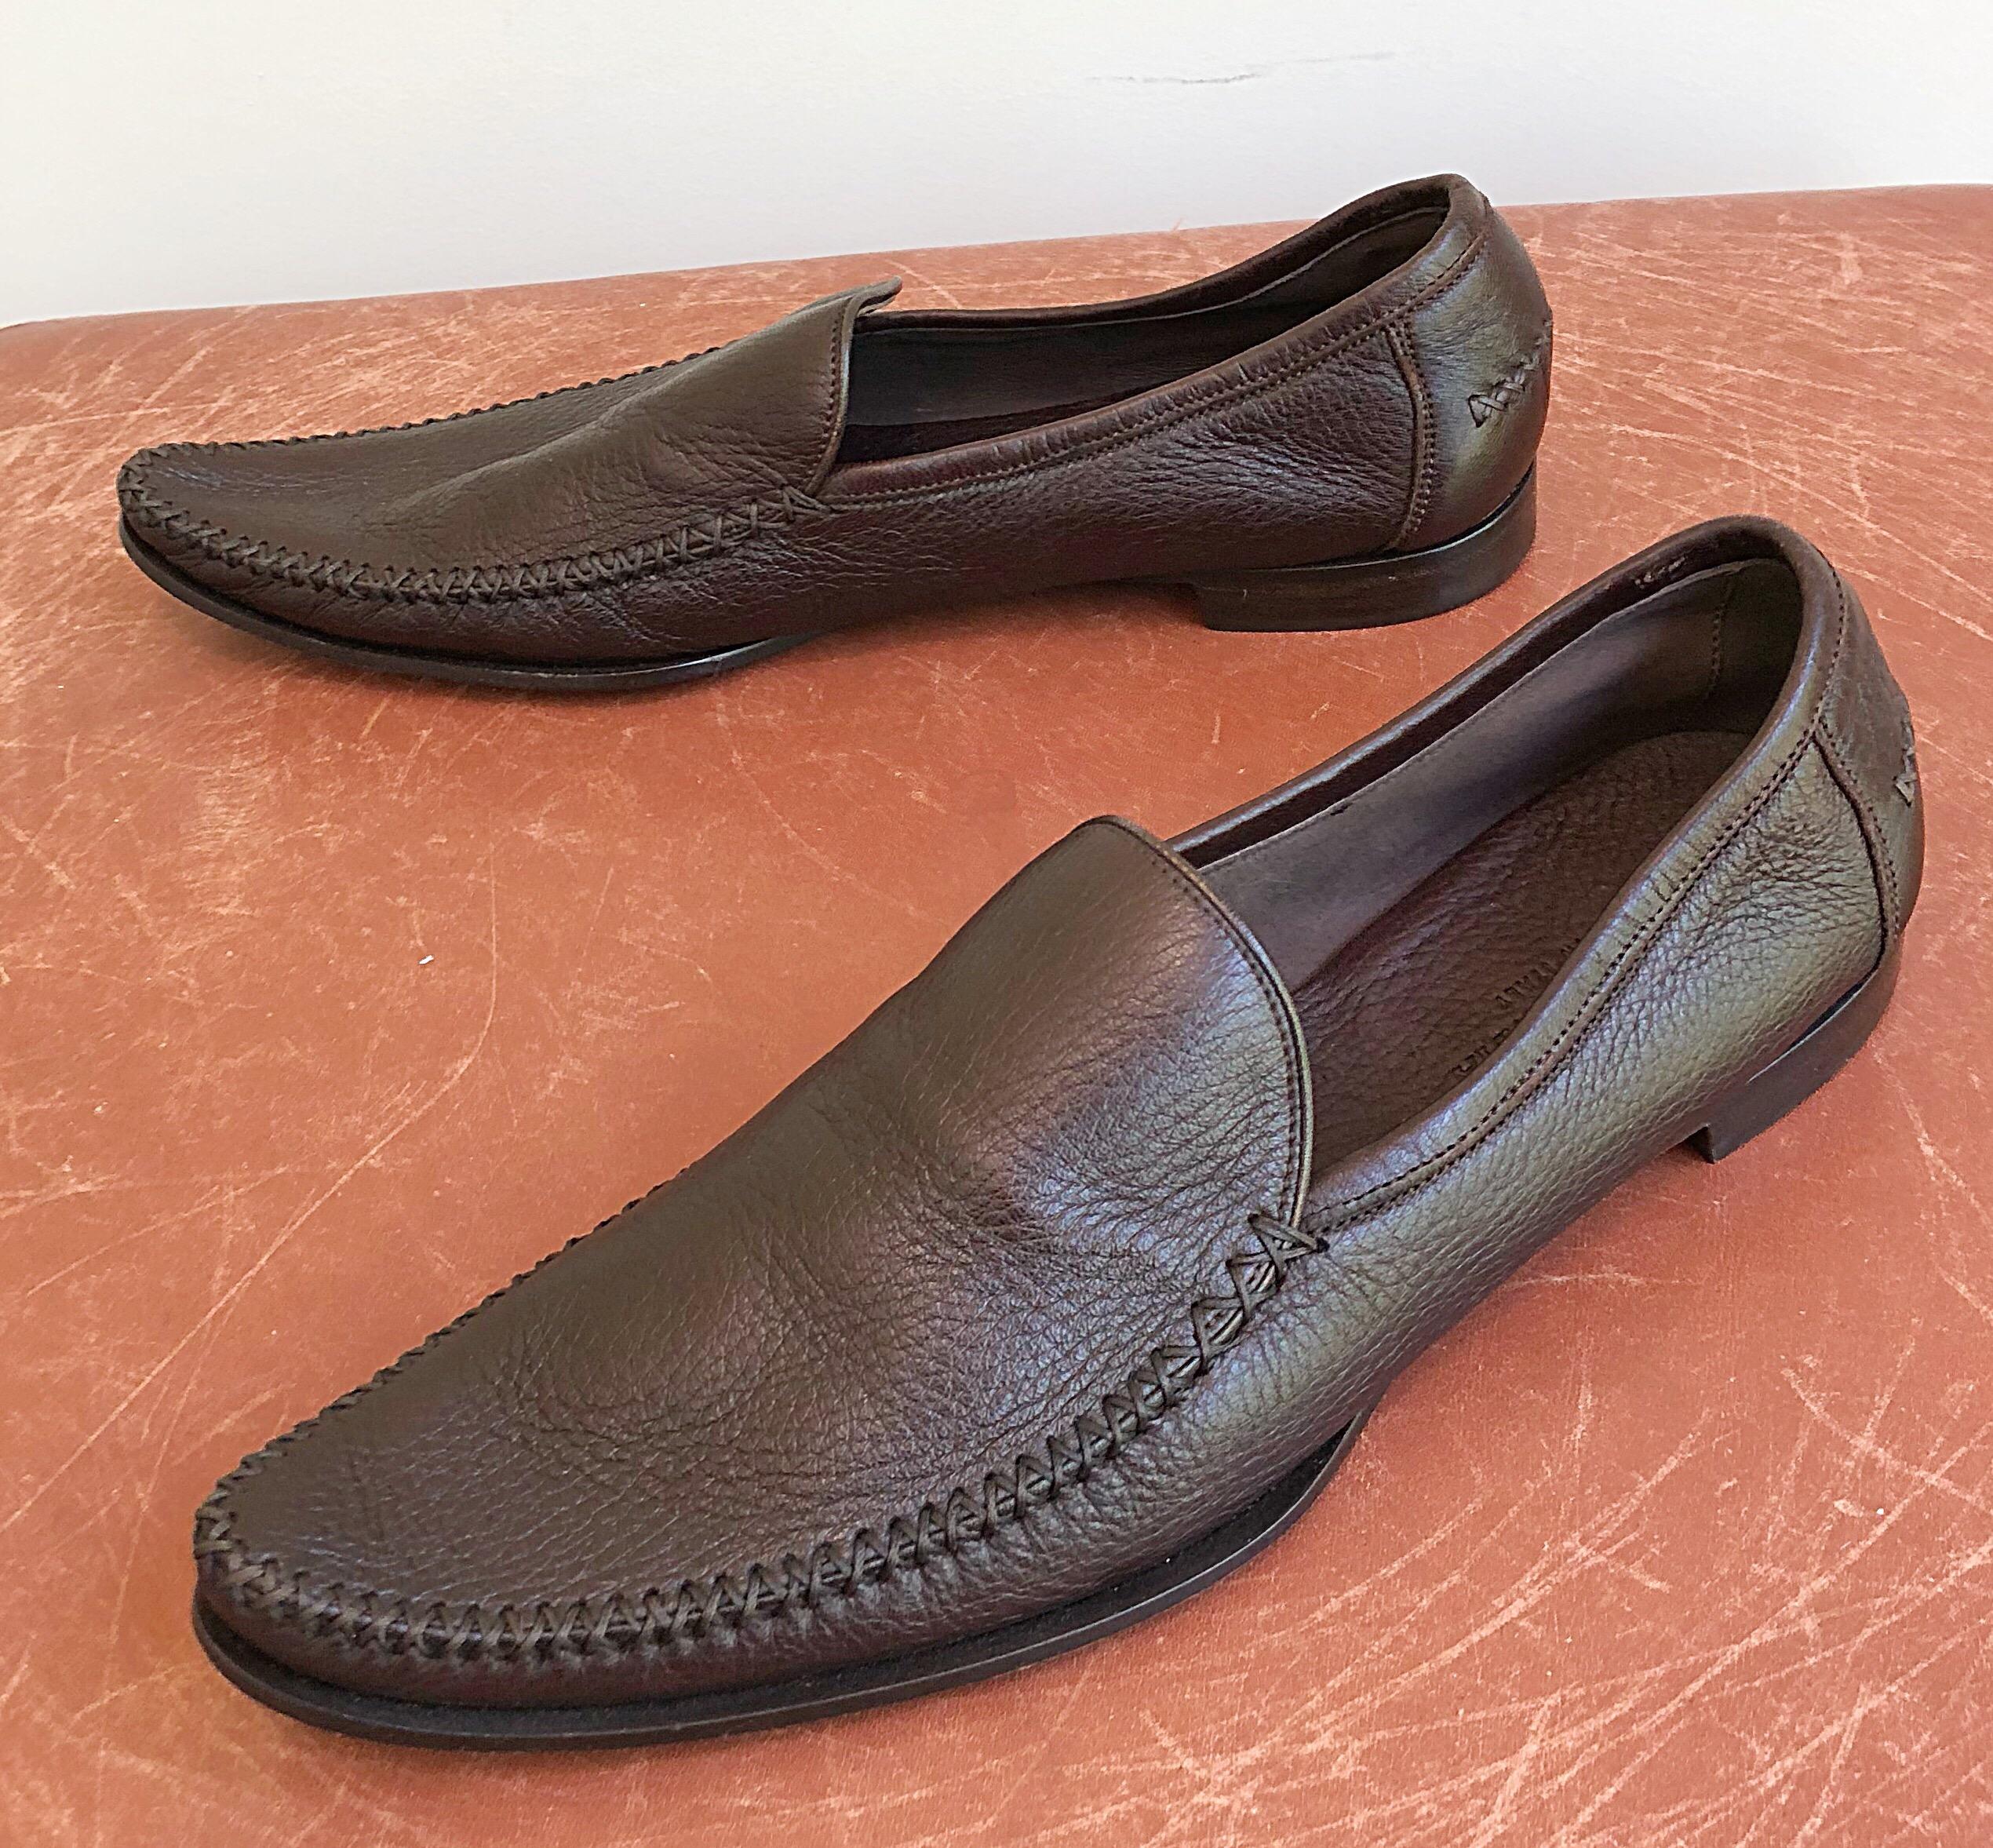 Bottega Veneta Size 38.5 / 8 - 8.5 Chocolate Brown Women's Flats Loafers Shoes In Excellent Condition For Sale In San Diego, CA